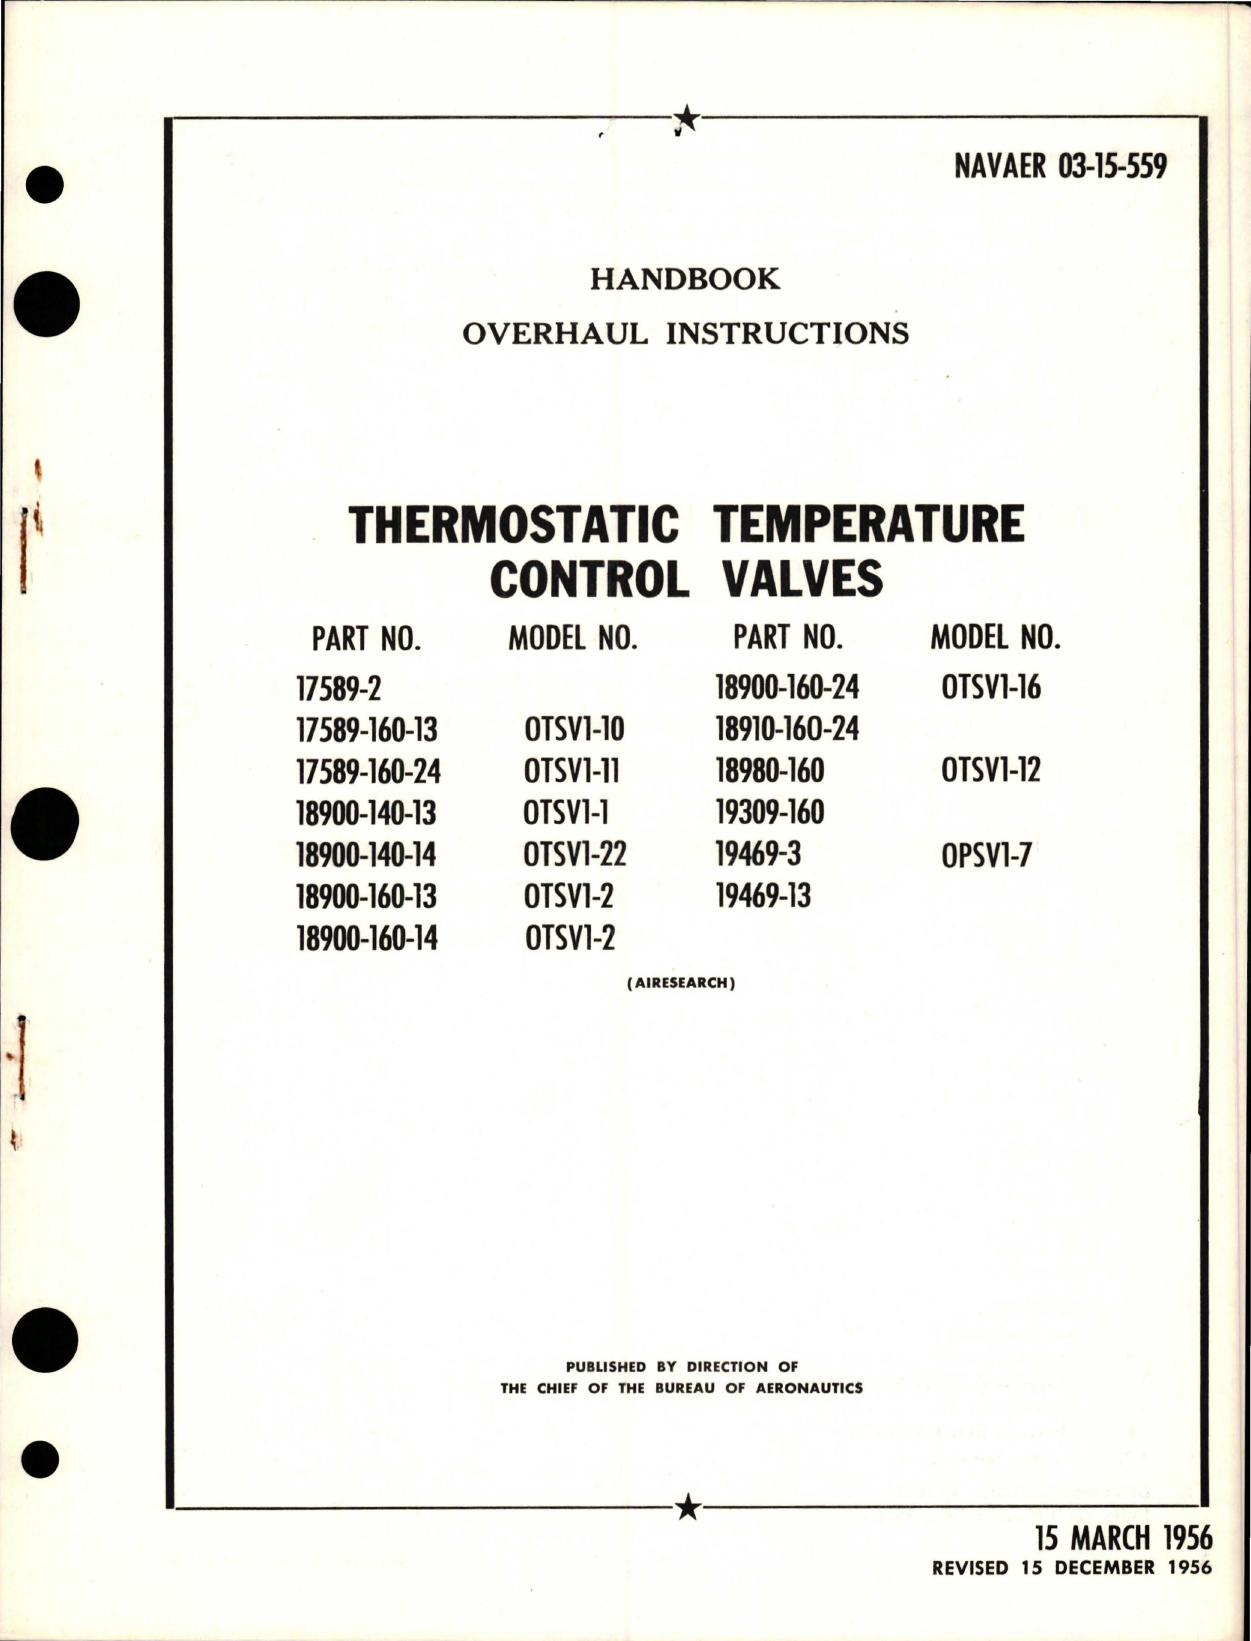 Sample page 1 from AirCorps Library document: Overhaul Instructions for Thermostatic Temperature Control Valves